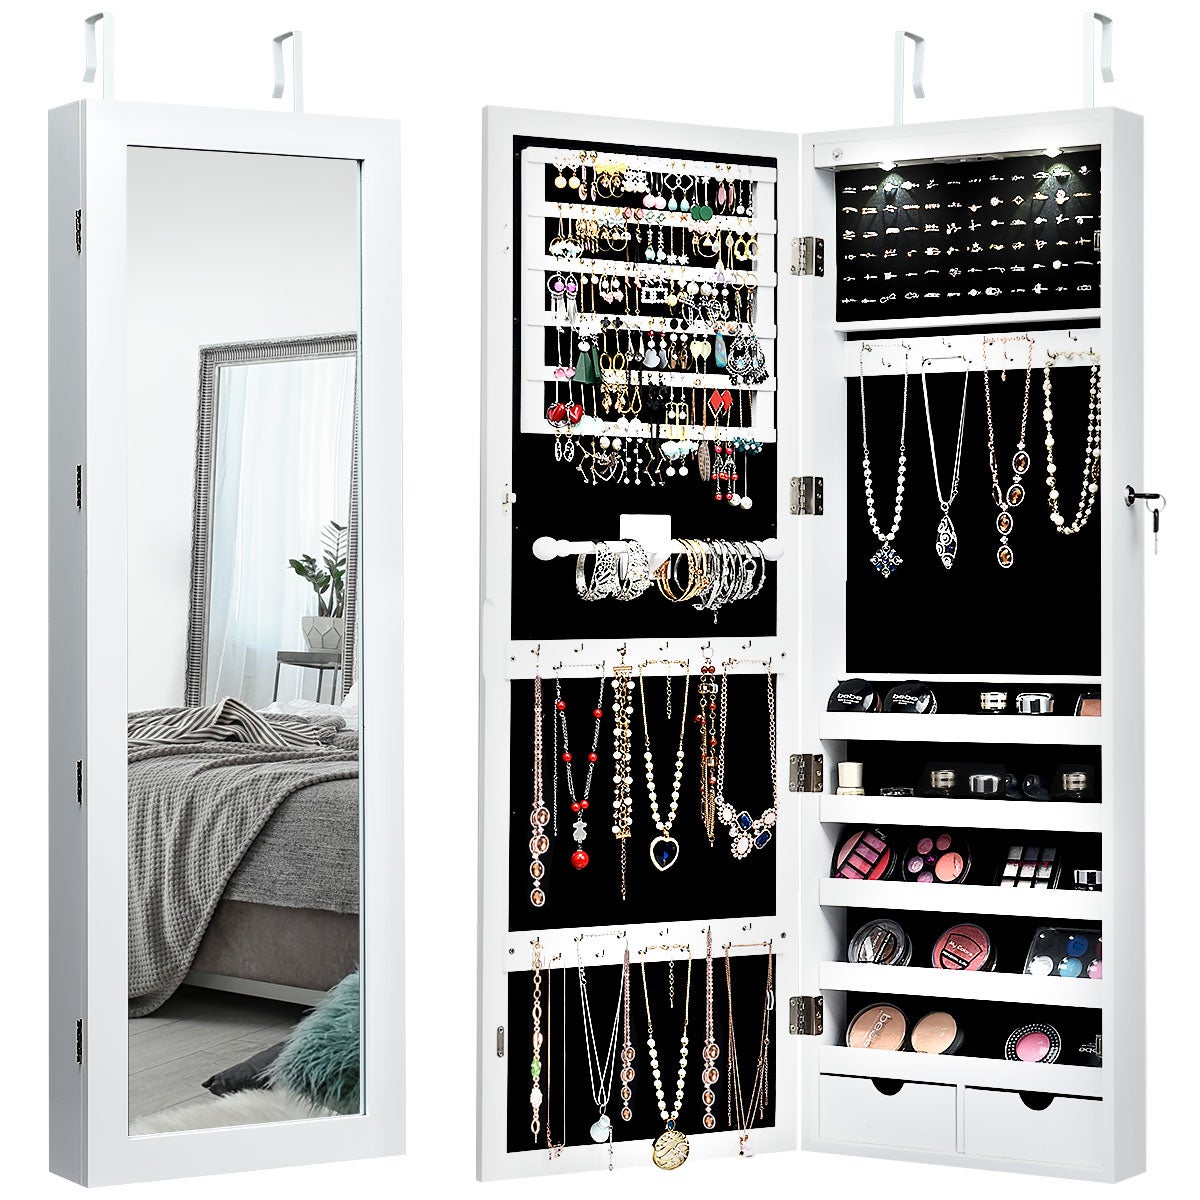 Costway Mirror Jewellery Cabinet Door Wall Mounted Jewelry Armoire Makeup Storage Cosmetics Organizer w/2 Built-In LED Lights